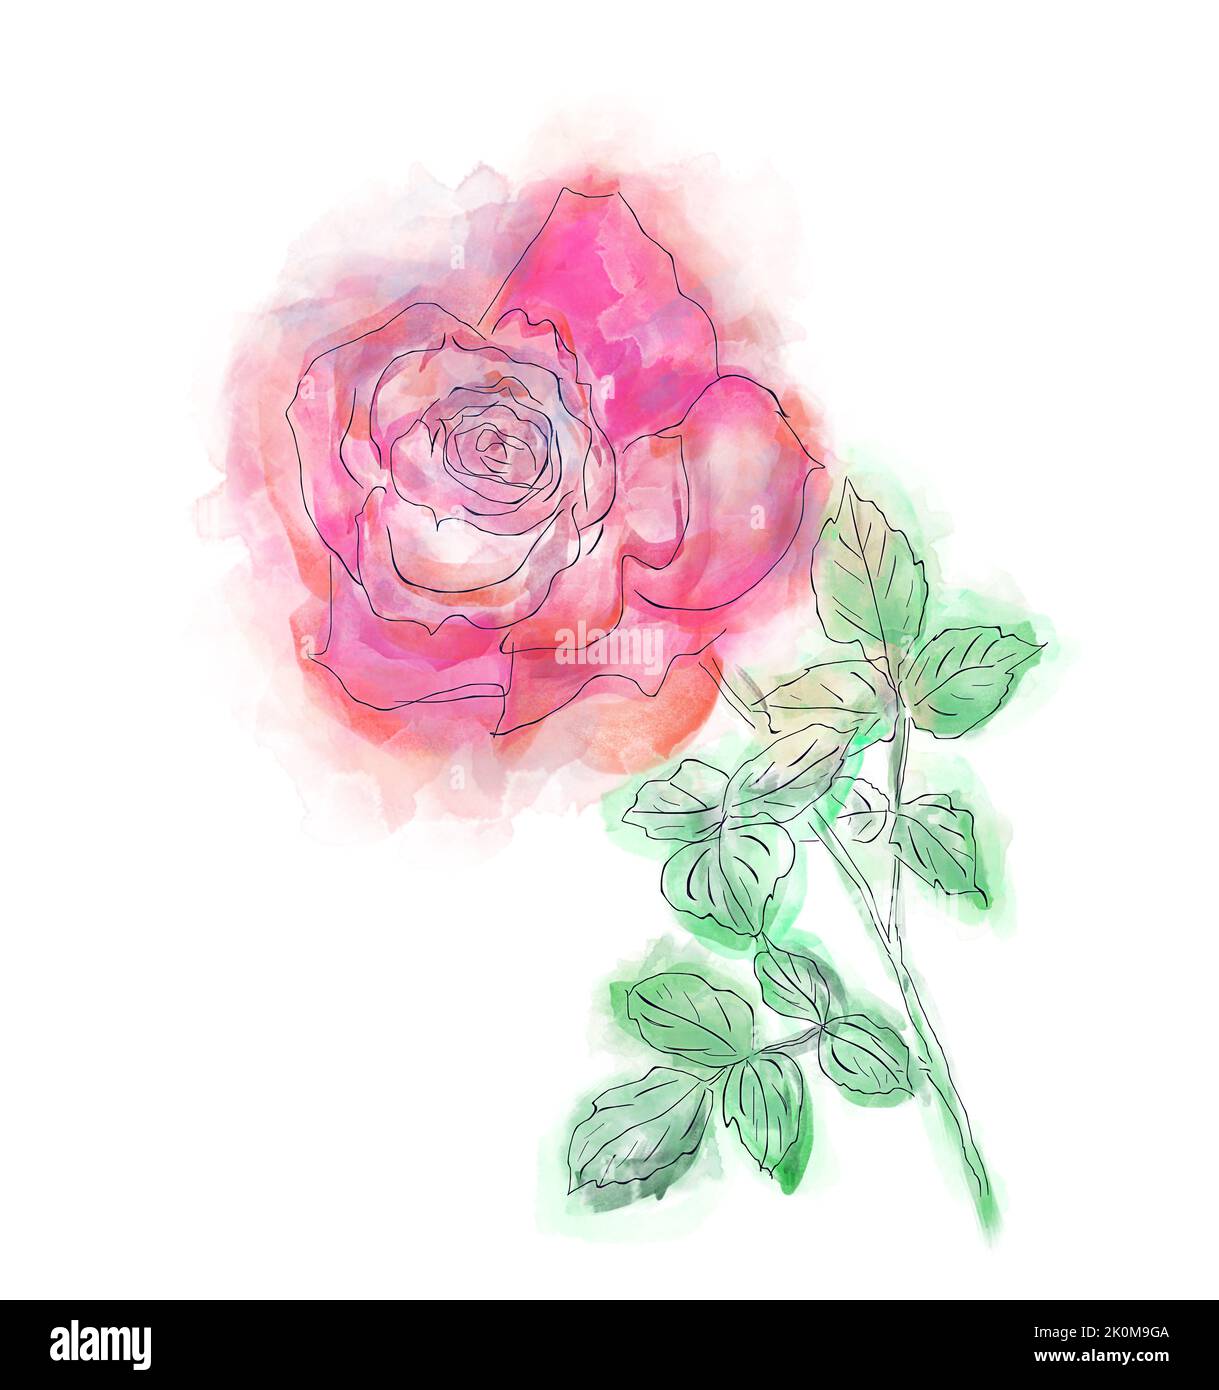 Rd Rose flower , watercolor painting Stock Photo